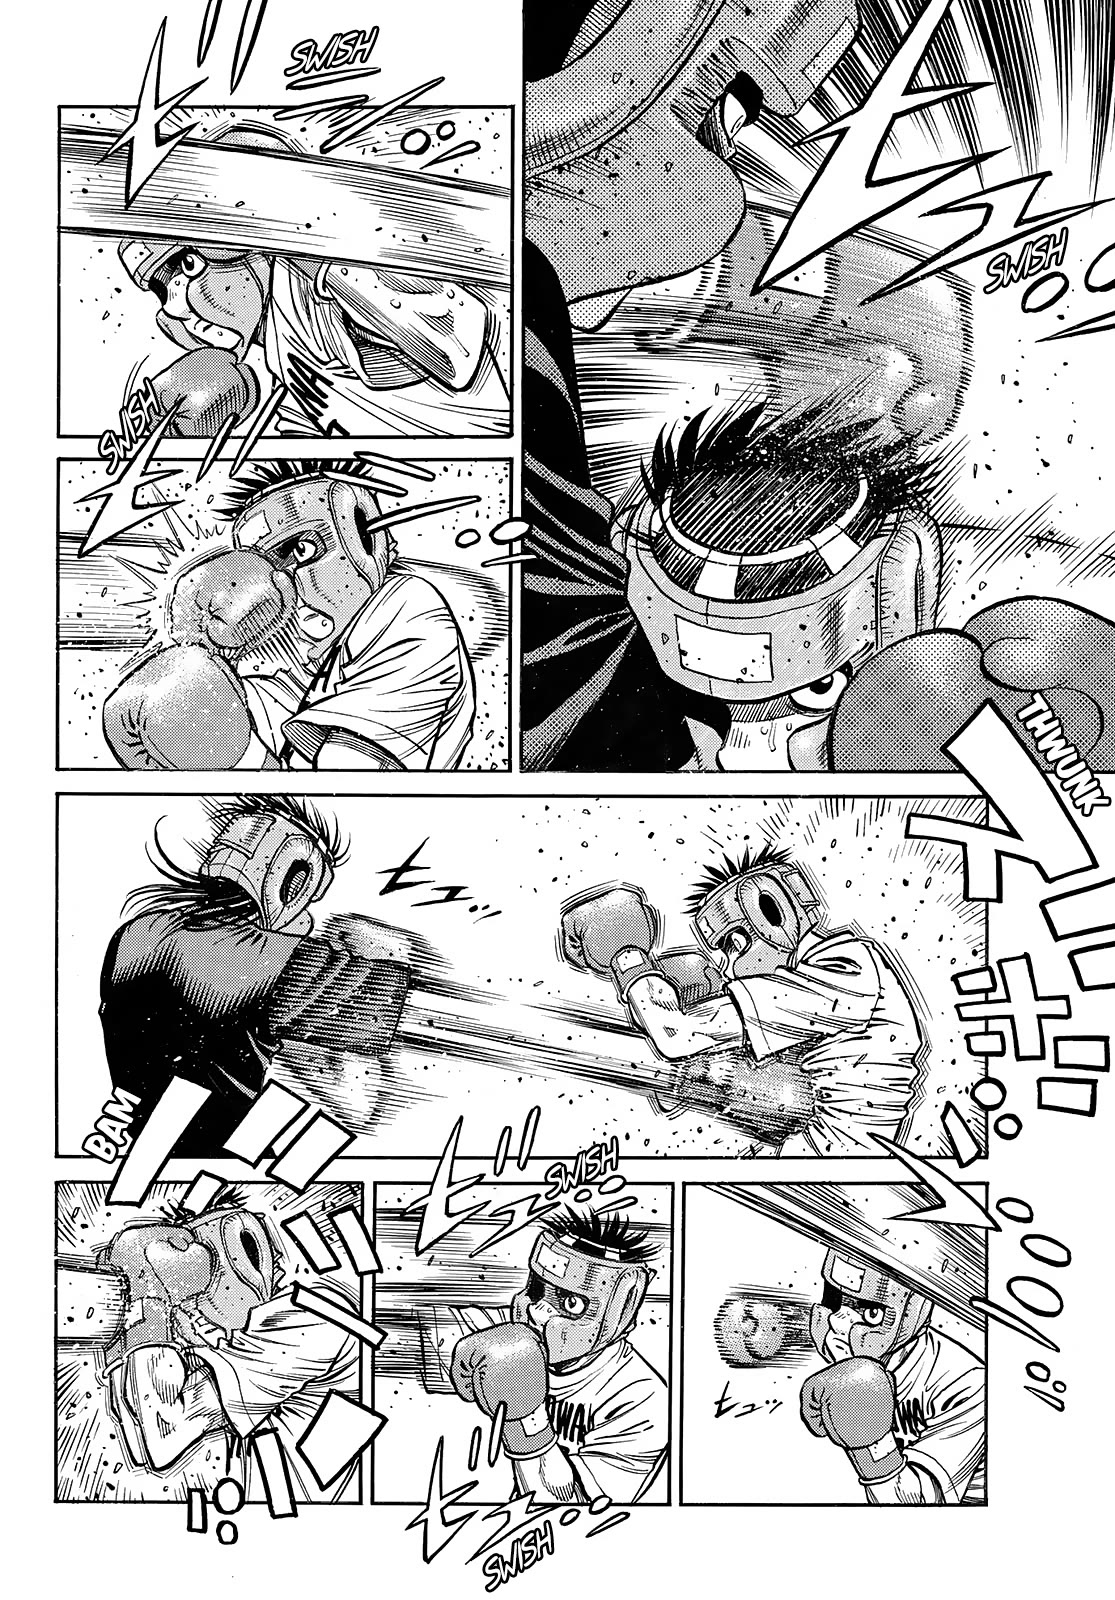 Hajime no Ippo, Chapter 1438 Title Fight Strategy image 7